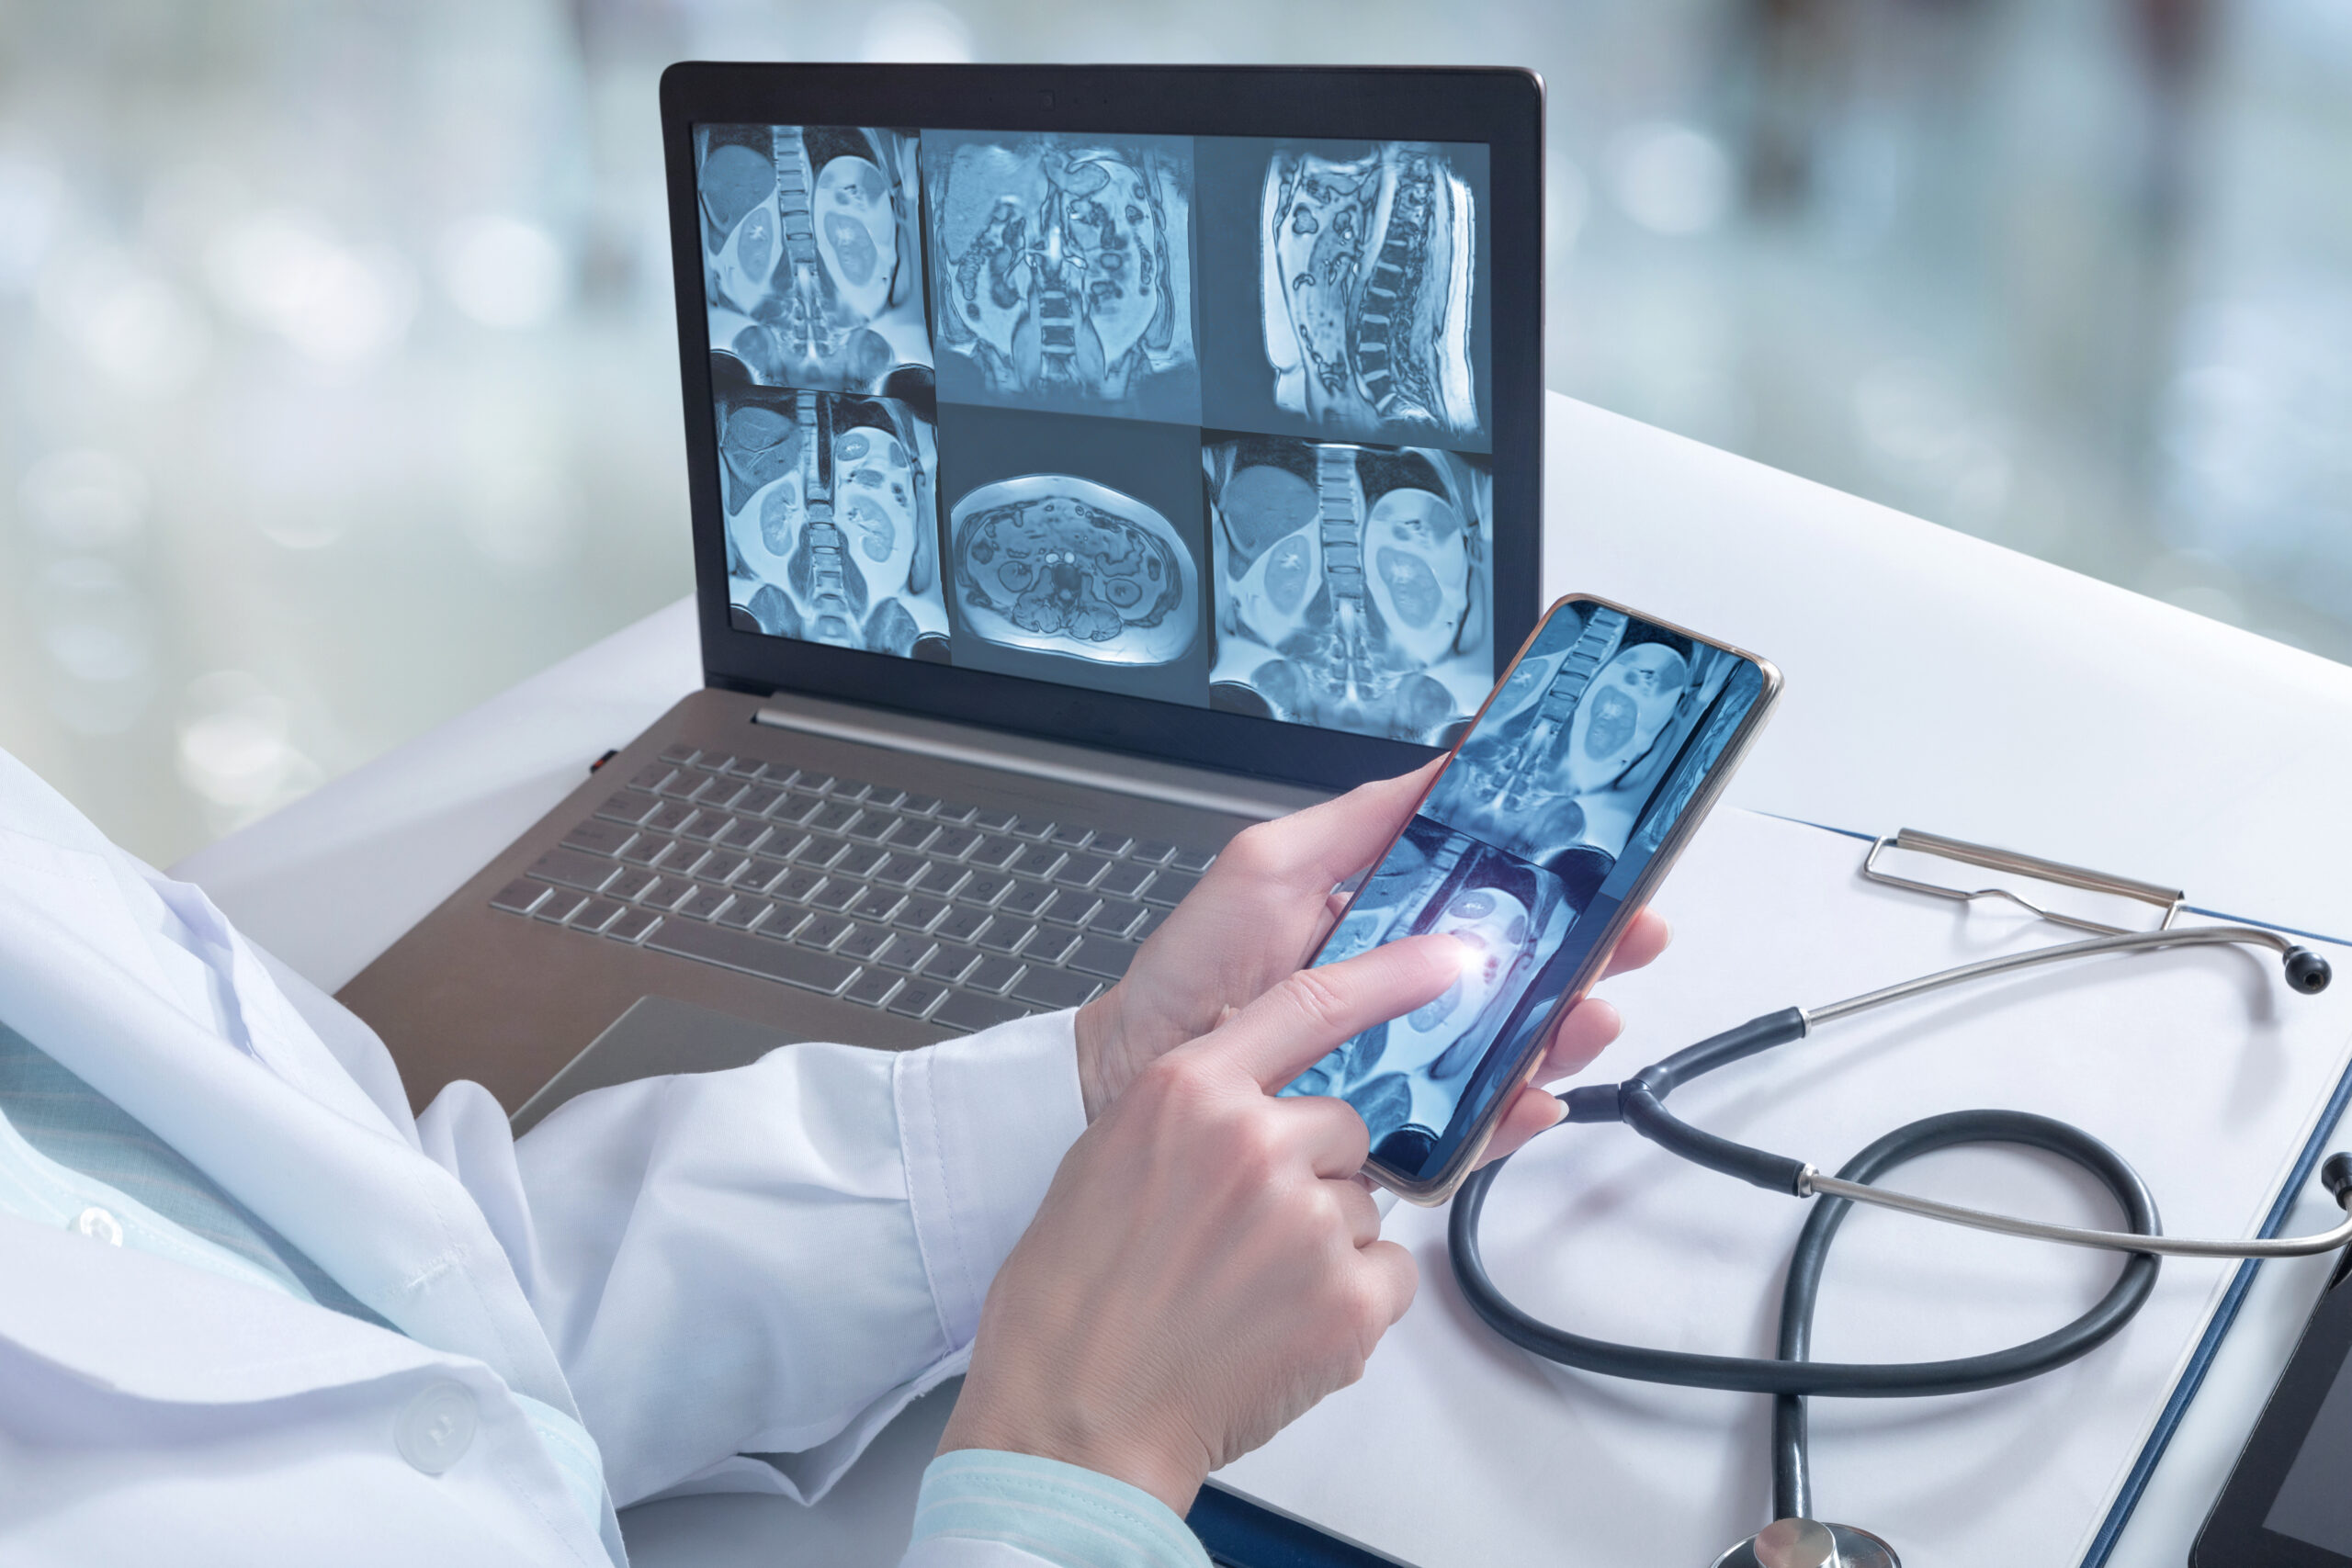 Doctor examines the internal organs of the patient on the computer and phone.